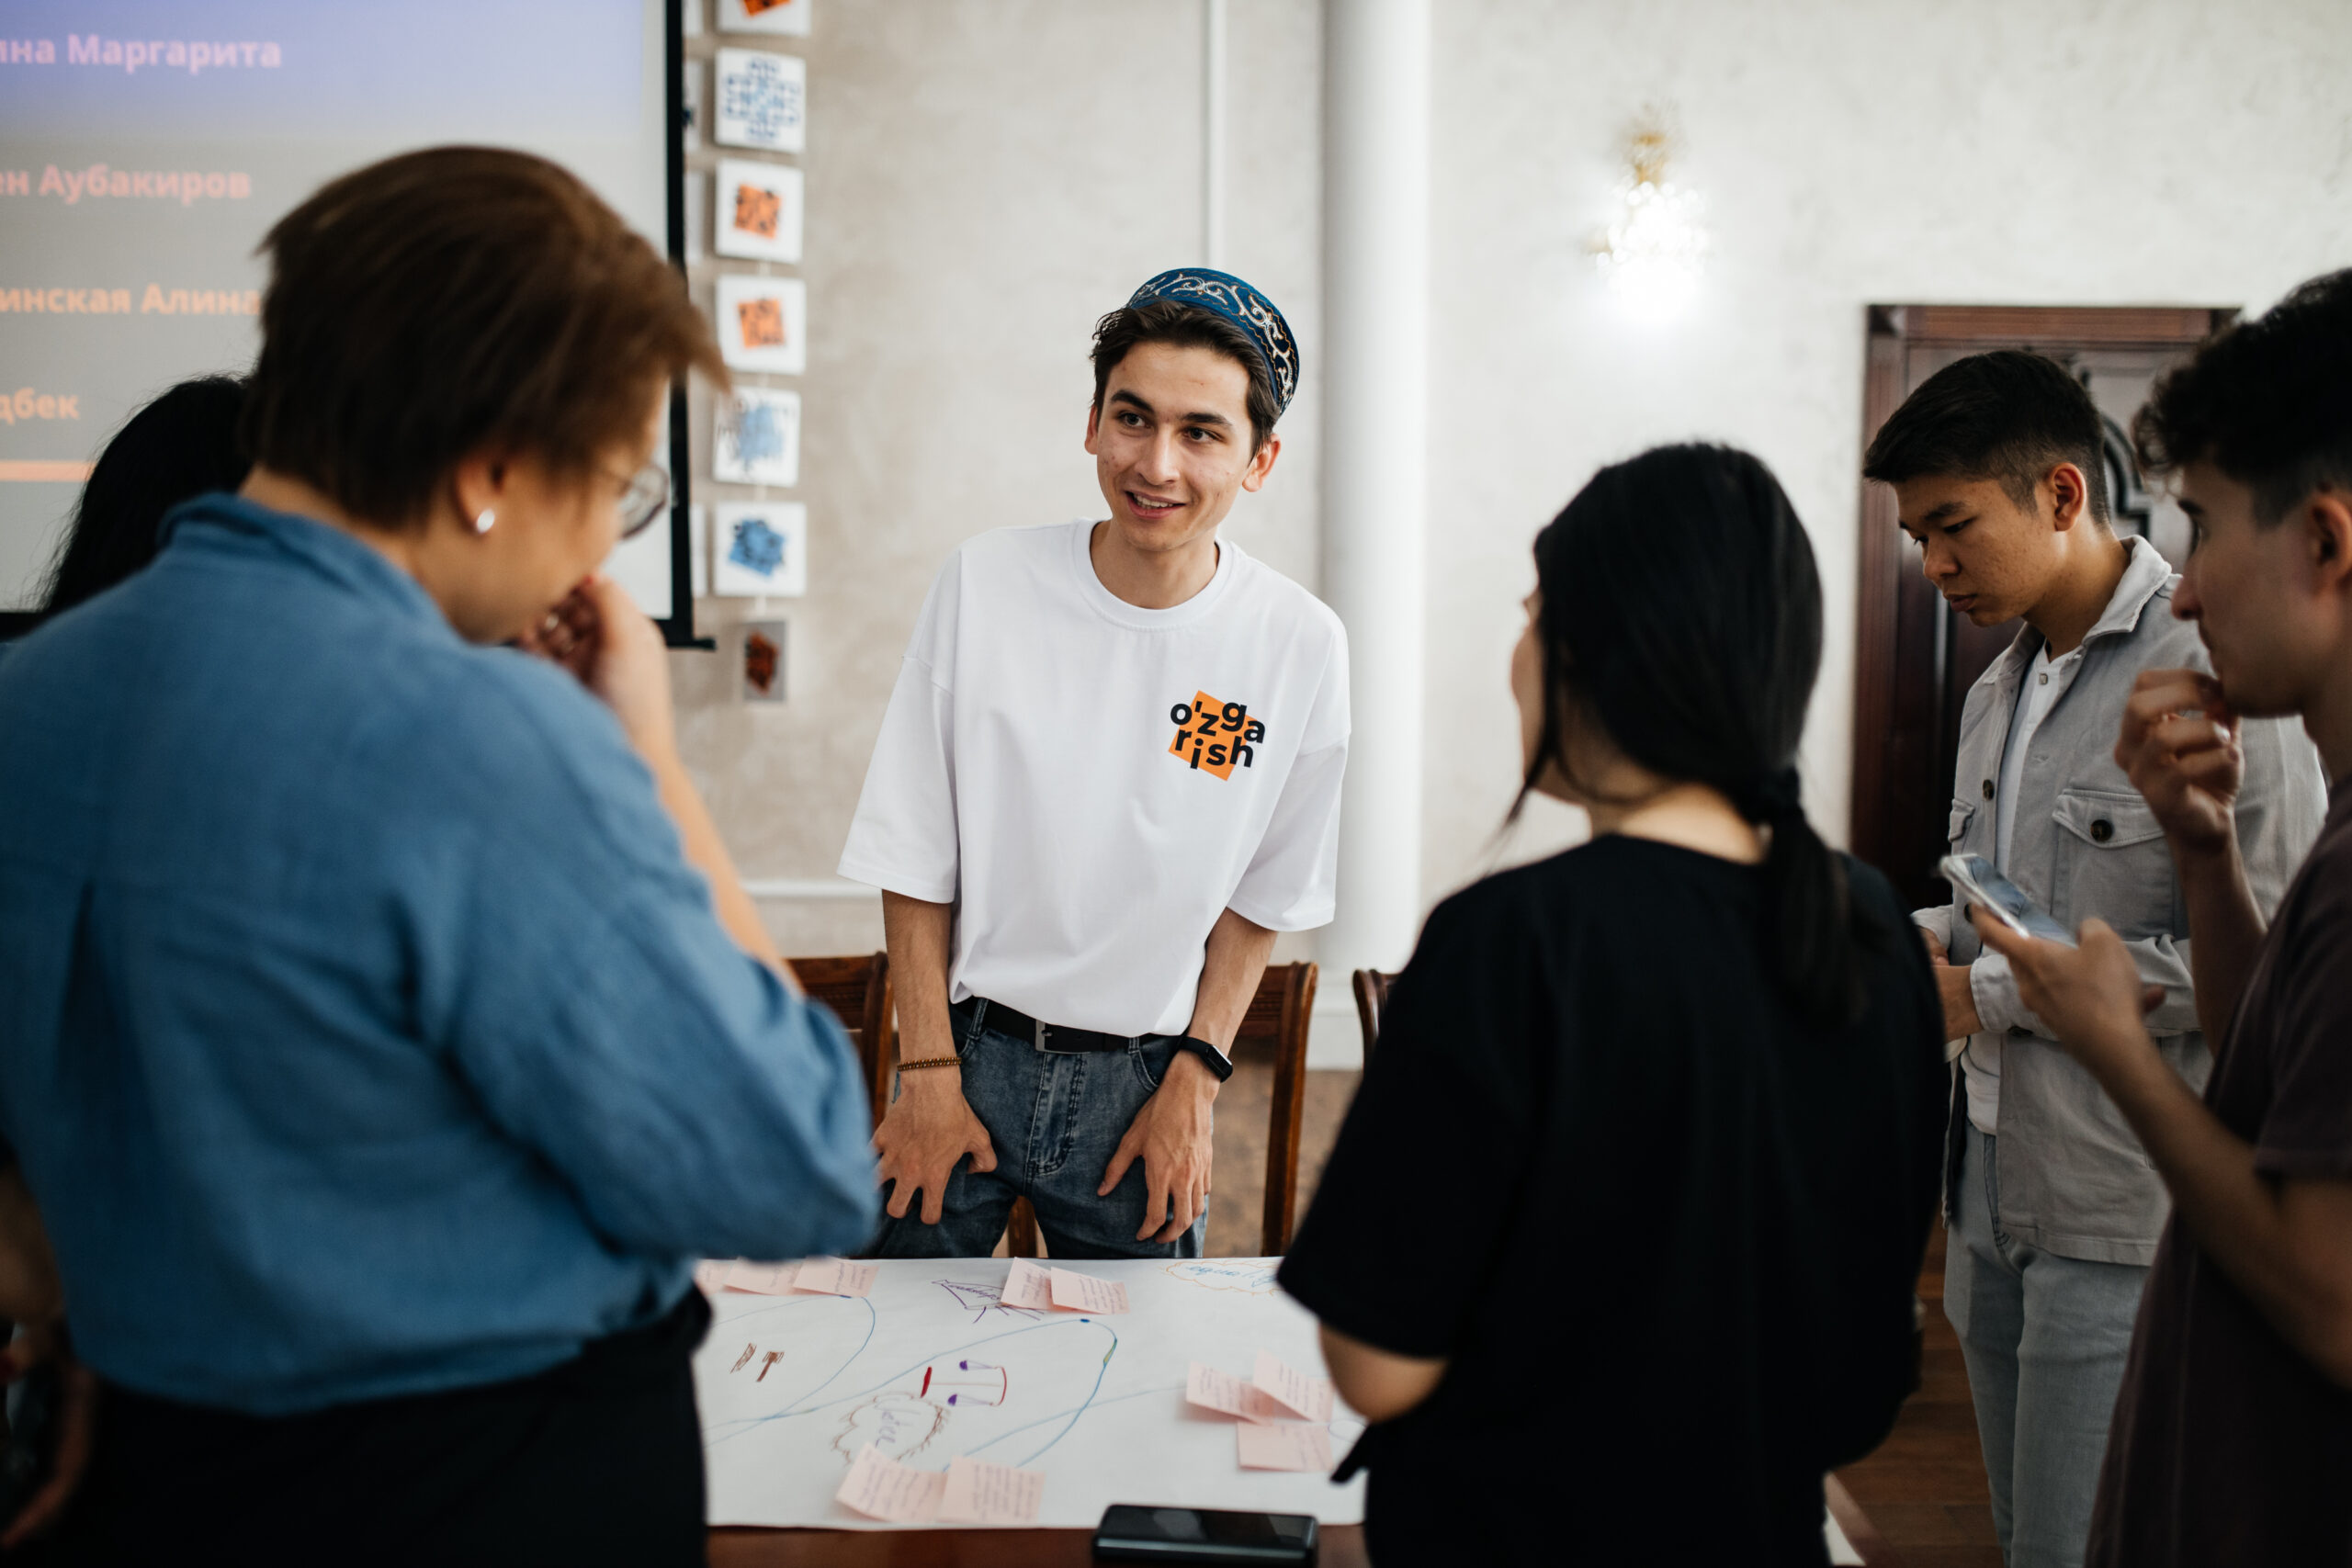 Six people gather around a table with a large sheet of paper on it, making a mind map of project ideas. The image focuses on one young man, who is wearing a CAYLA t-shirt with the Uzbek word 